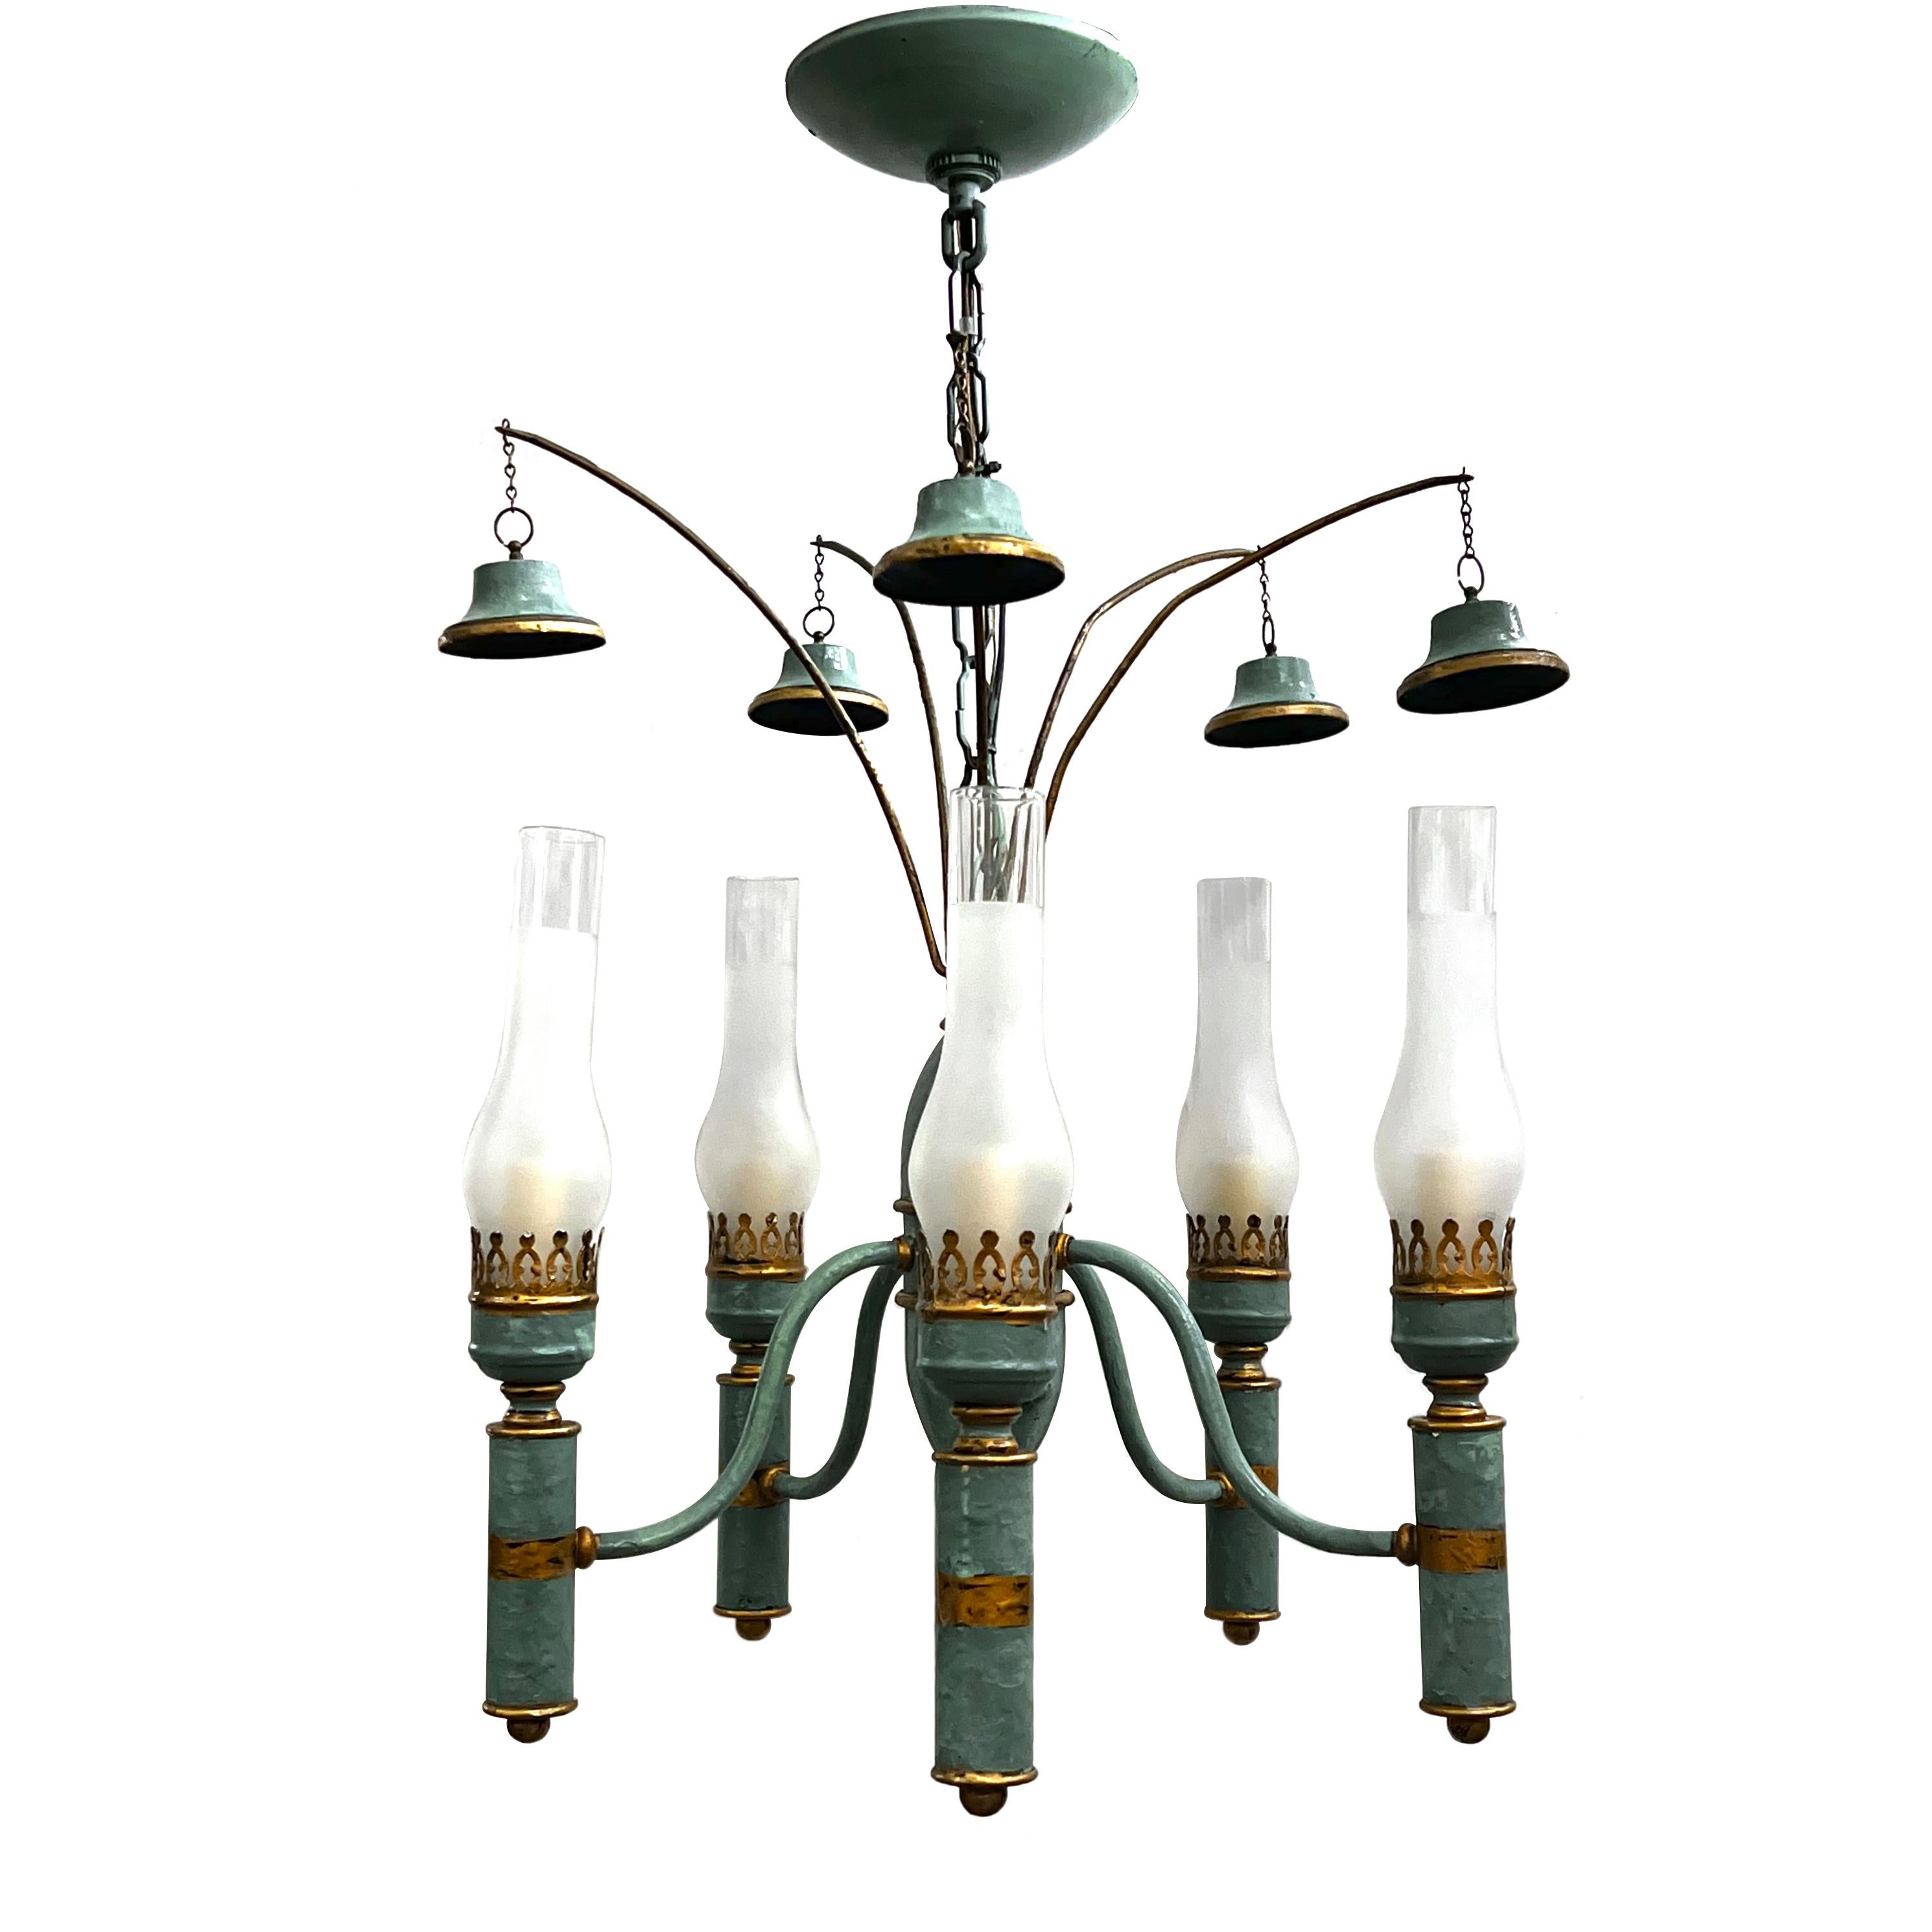 A circa 1920s French painted and gilt tole chandelier.

Measurements:
Drop: 25